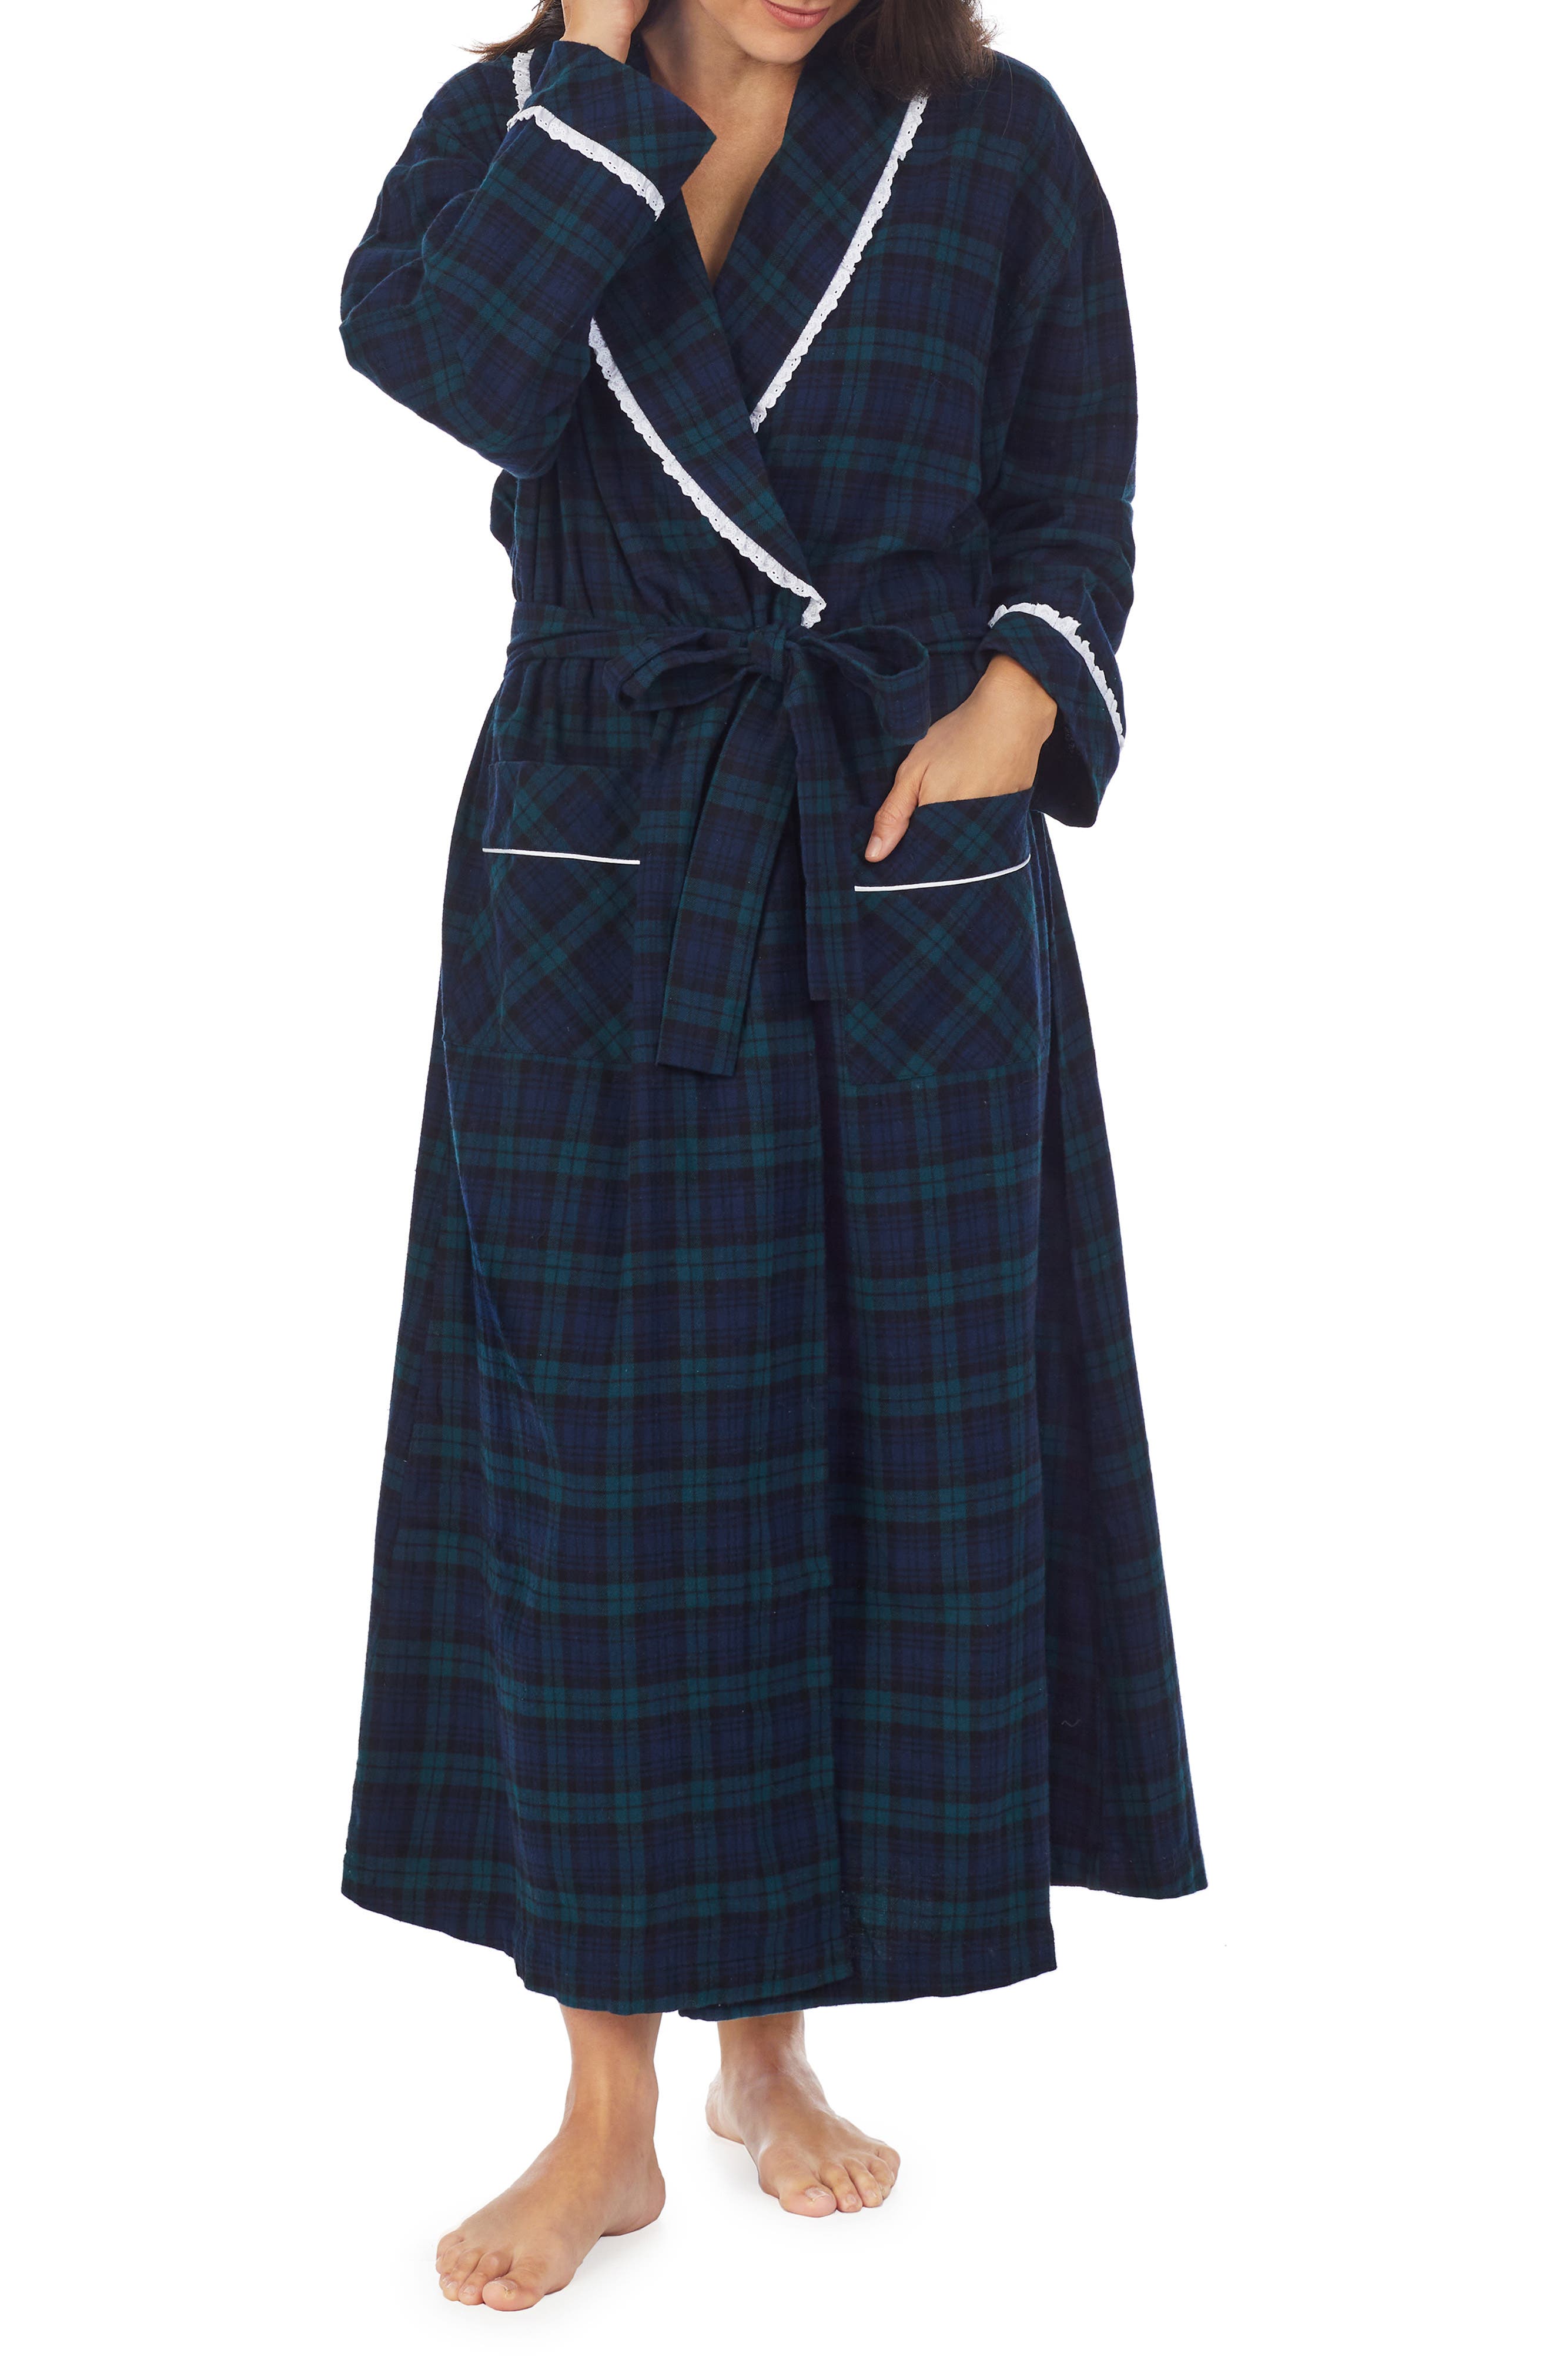 Lanz of Salzburg Flannel Robe in Red Plaid at Nordstrom